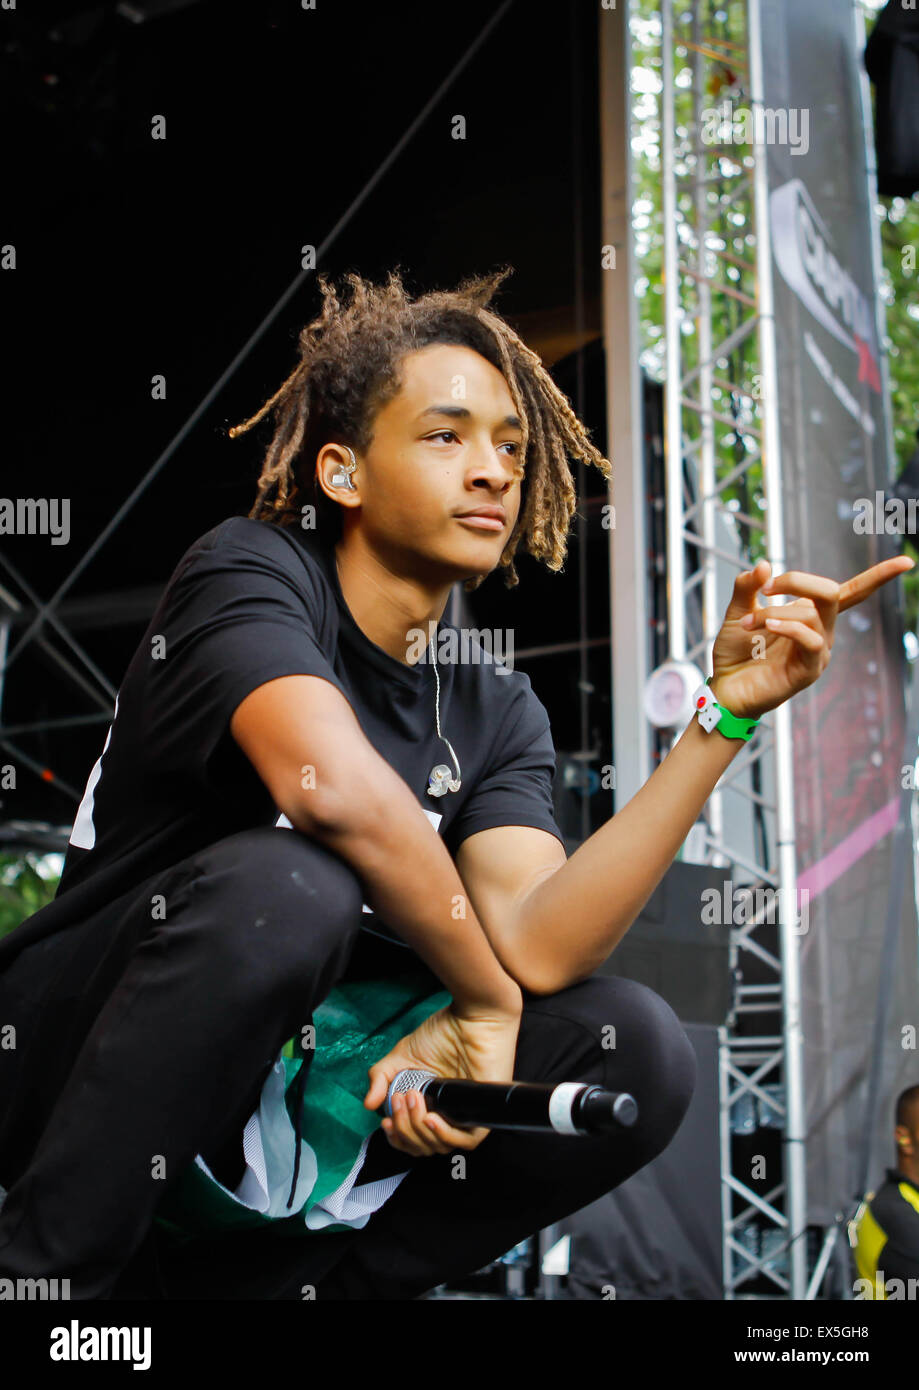 Jaden Smith Looking For Fashion CEO on Twitter – The Hollywood Reporter